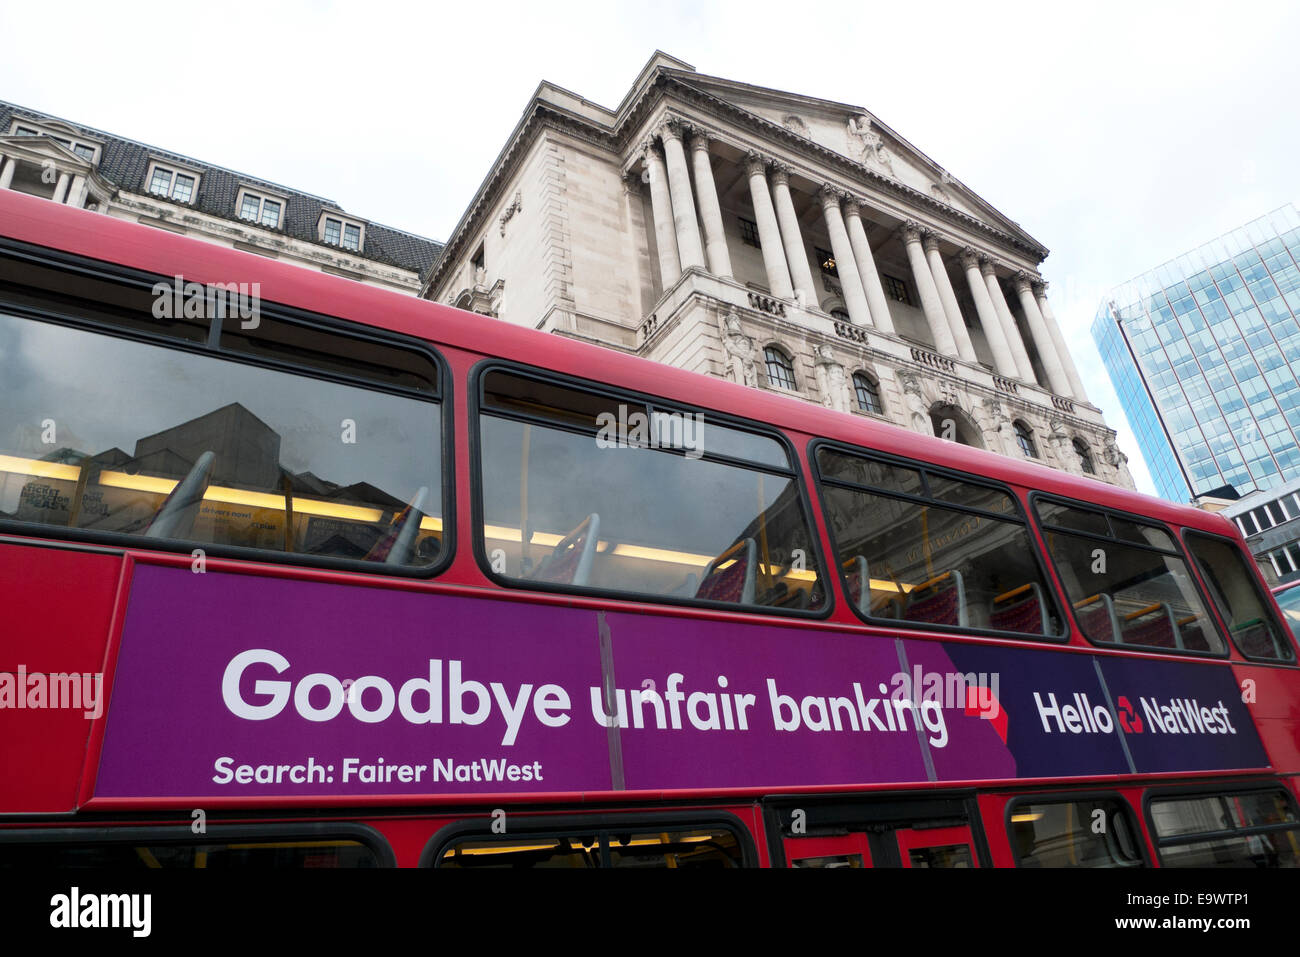 National Westminster (Nat West) bank 'Goodbye unfair banking' advert on double-decker bus by Bank of England Threadneedle St in London UK KATHY DEWITT Stock Photo